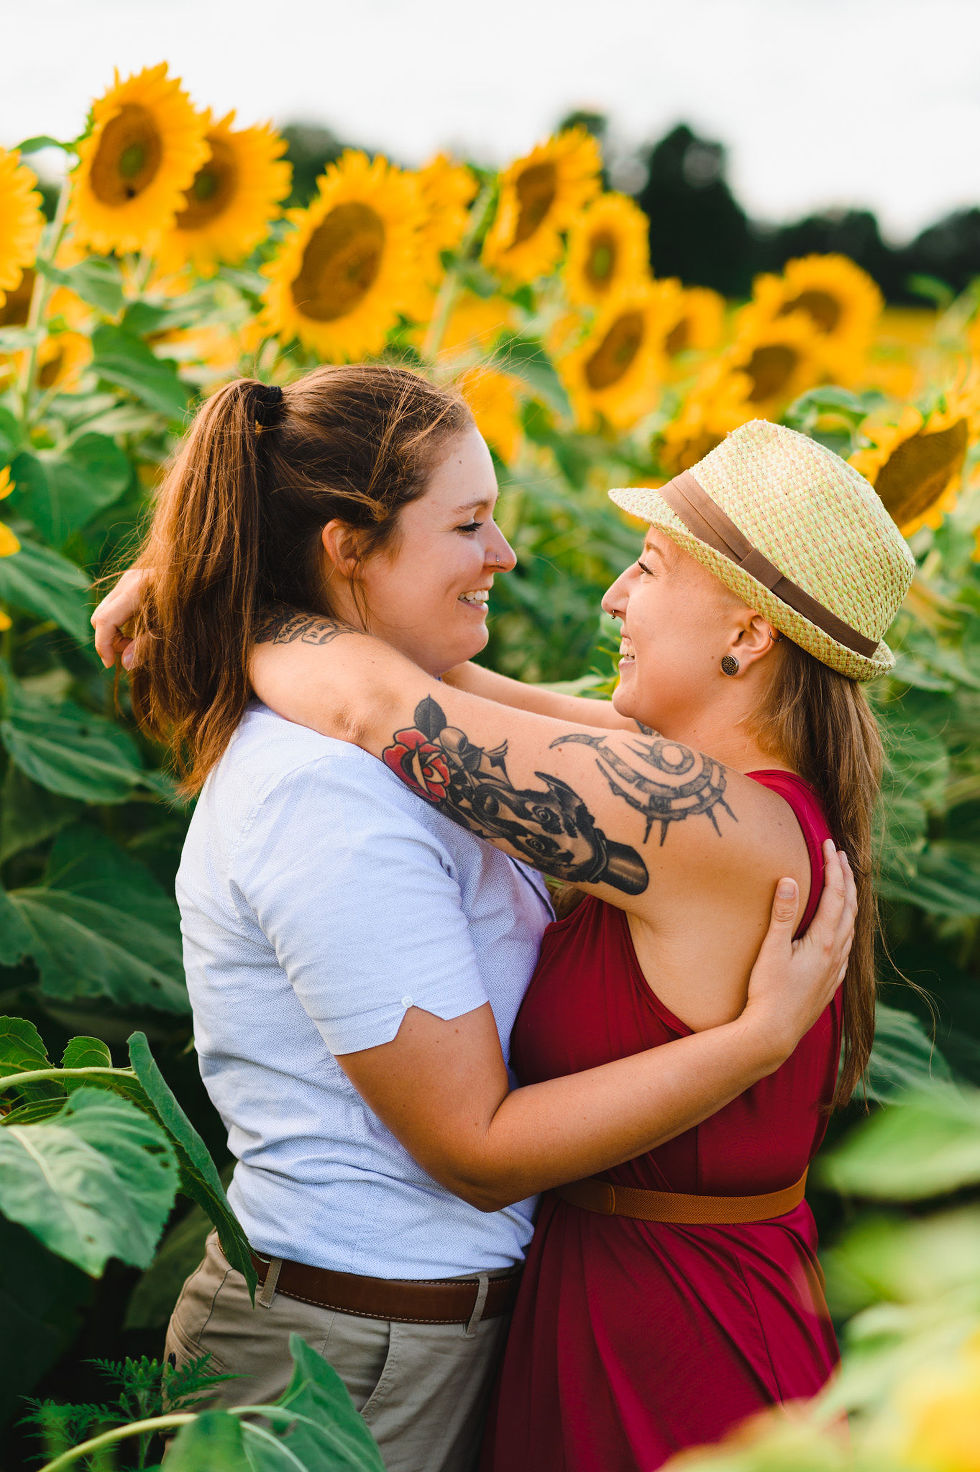 2 women with their arms wrapped around each other while standing in stunning sunflower field Toronto engagement photos